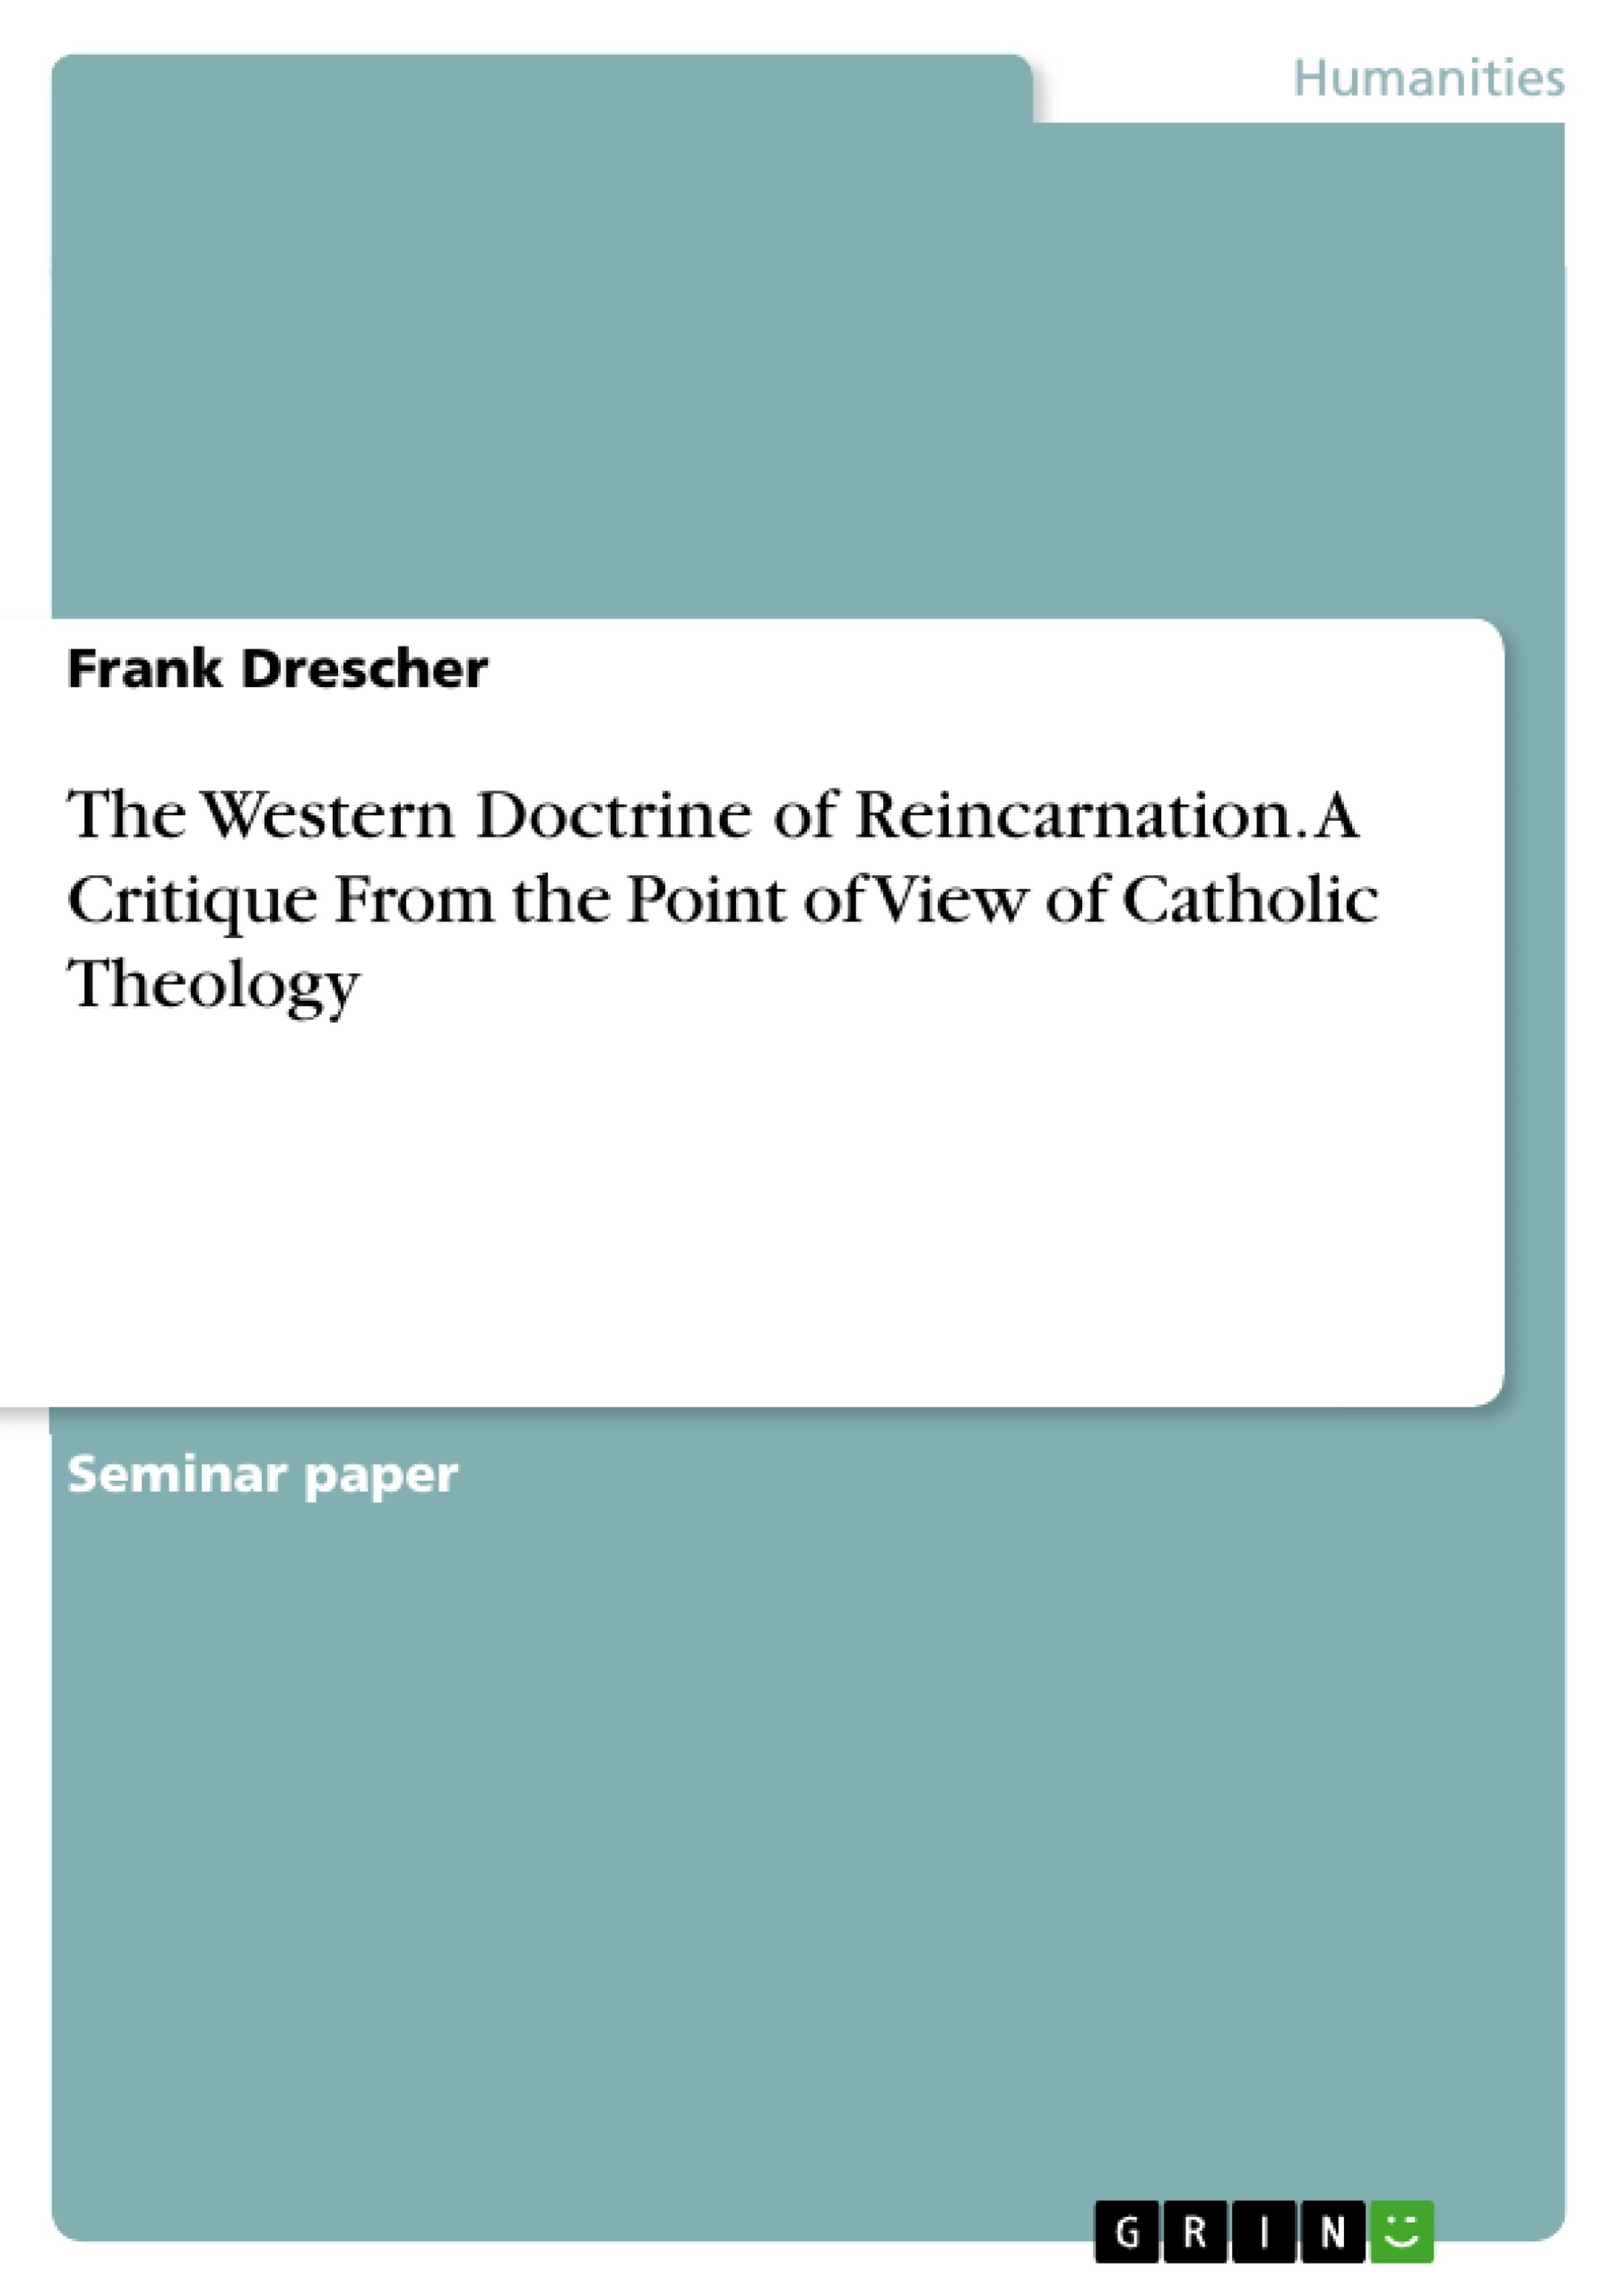 Título: The Western Doctrine of Reincarnation. A Critique From the Point of View of Catholic Theology